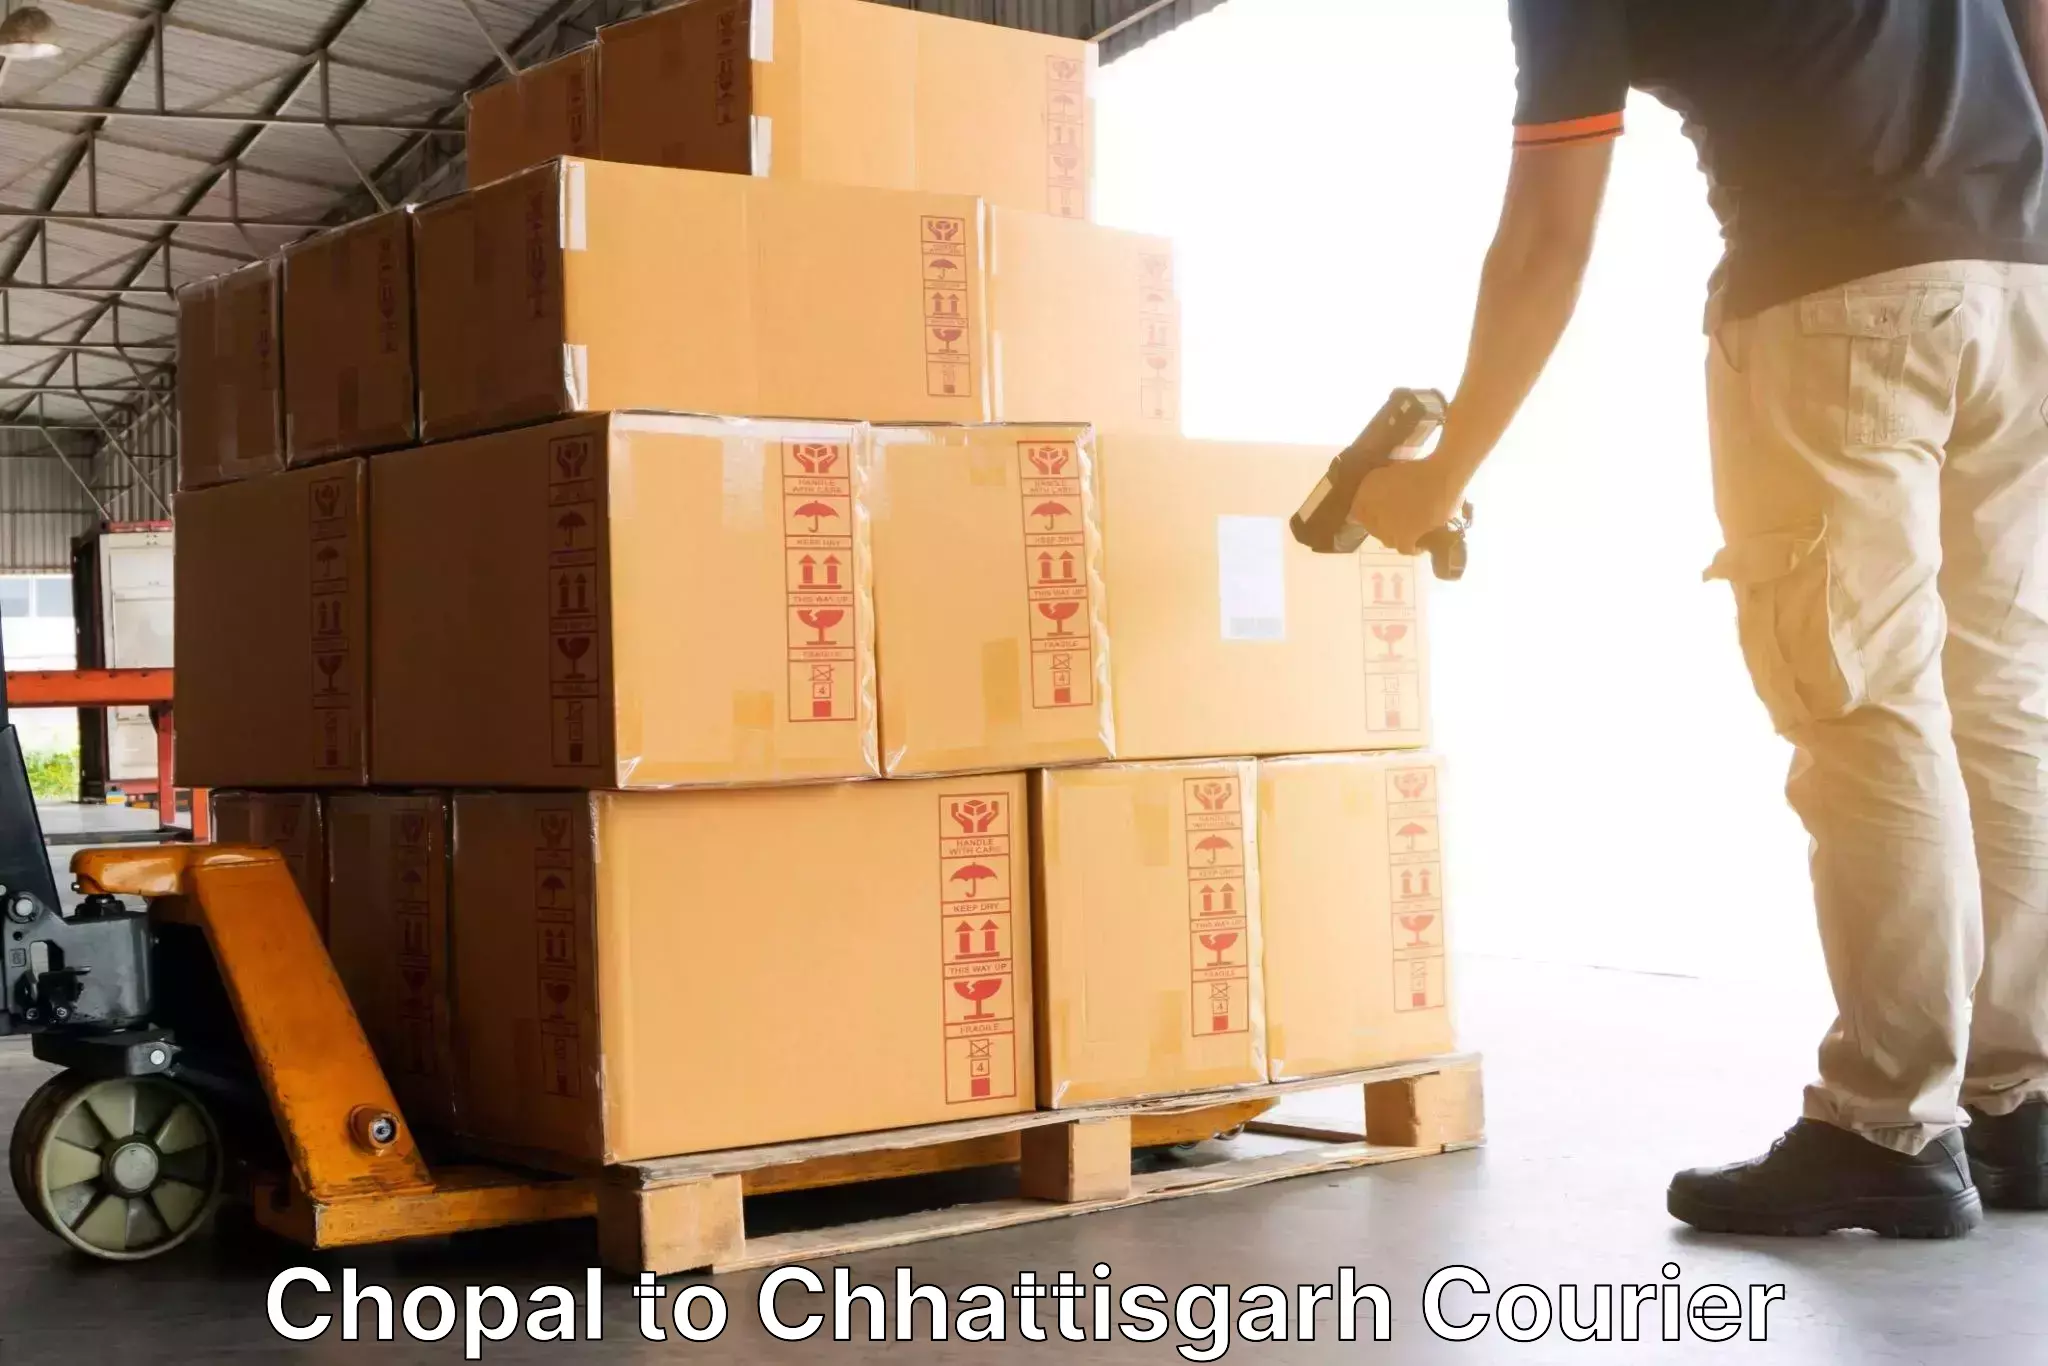 Specialized shipment handling in Chopal to Bhatapara